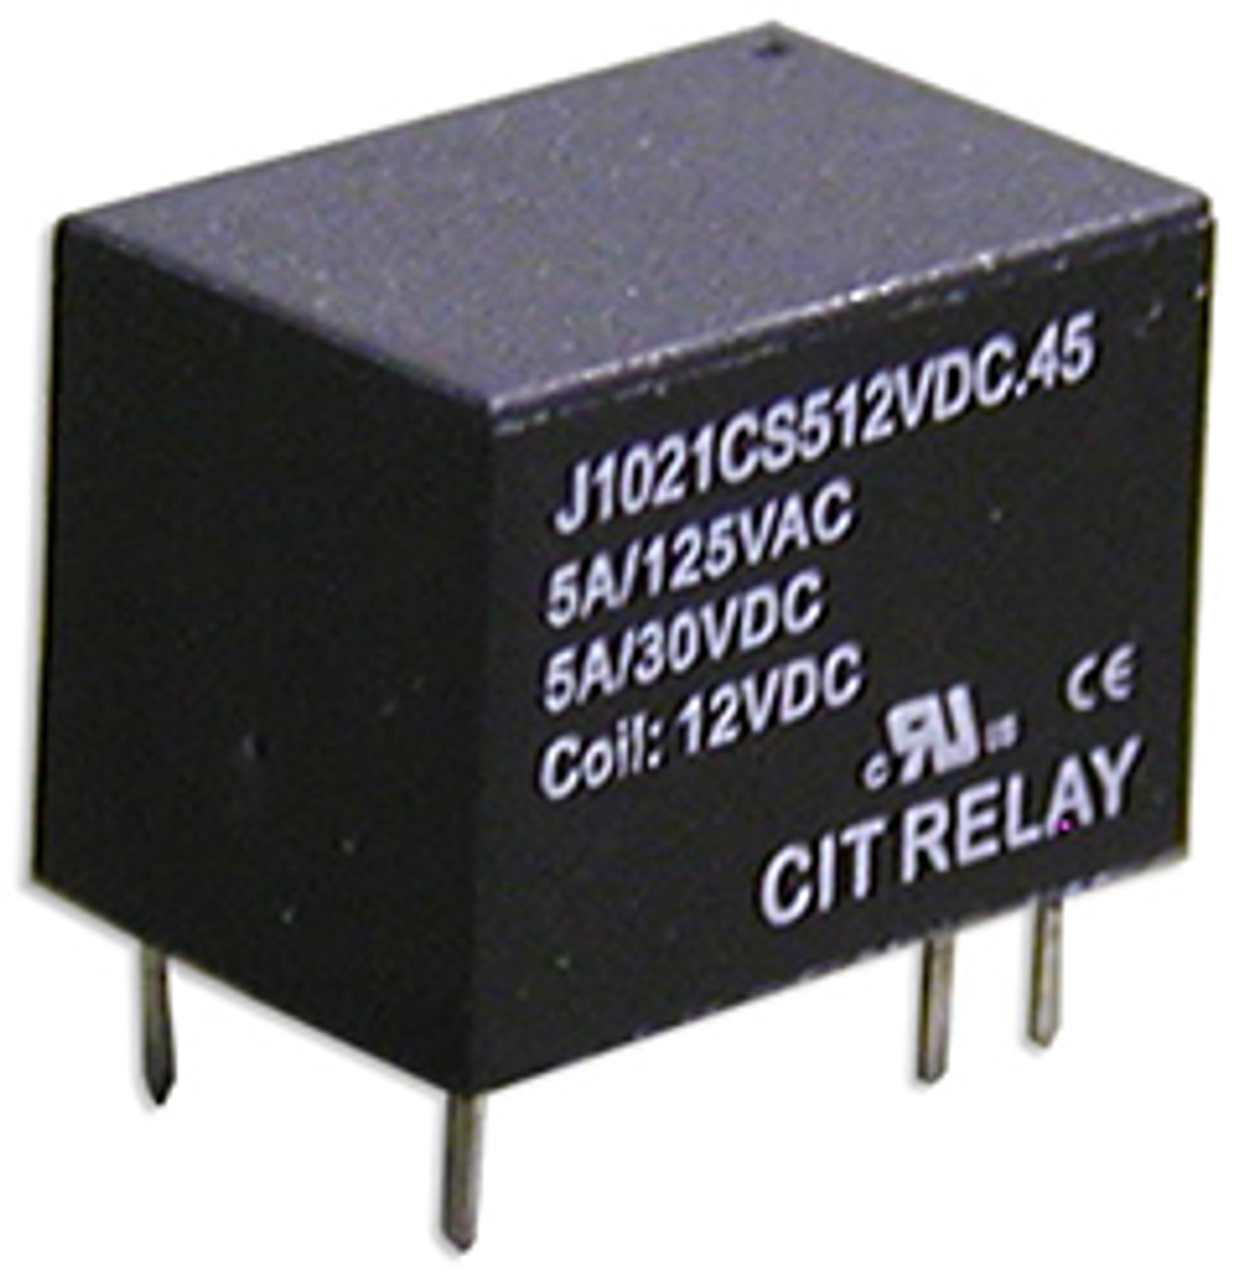 CIT Relay and Switch J1021AS16VDC.20 Signal Relays